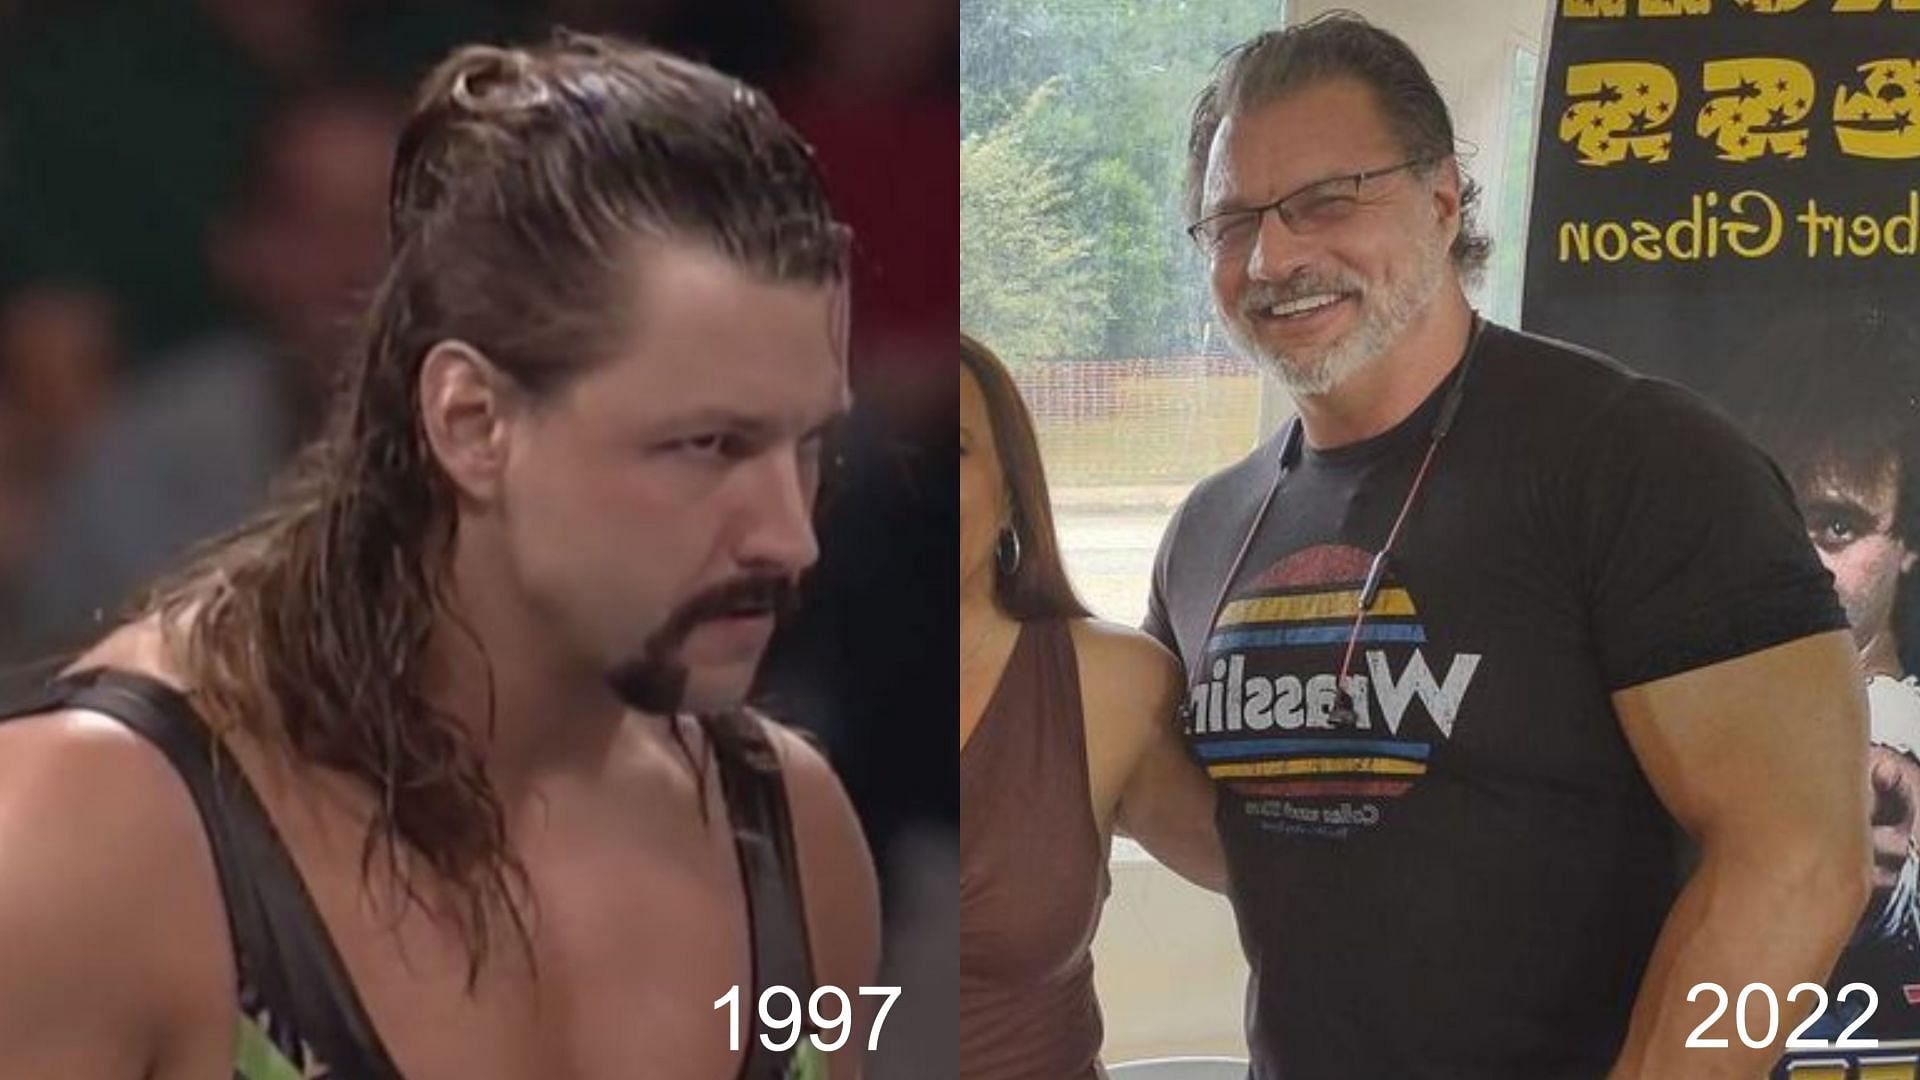 Al Snow was mainly an enhancement talent in 1997